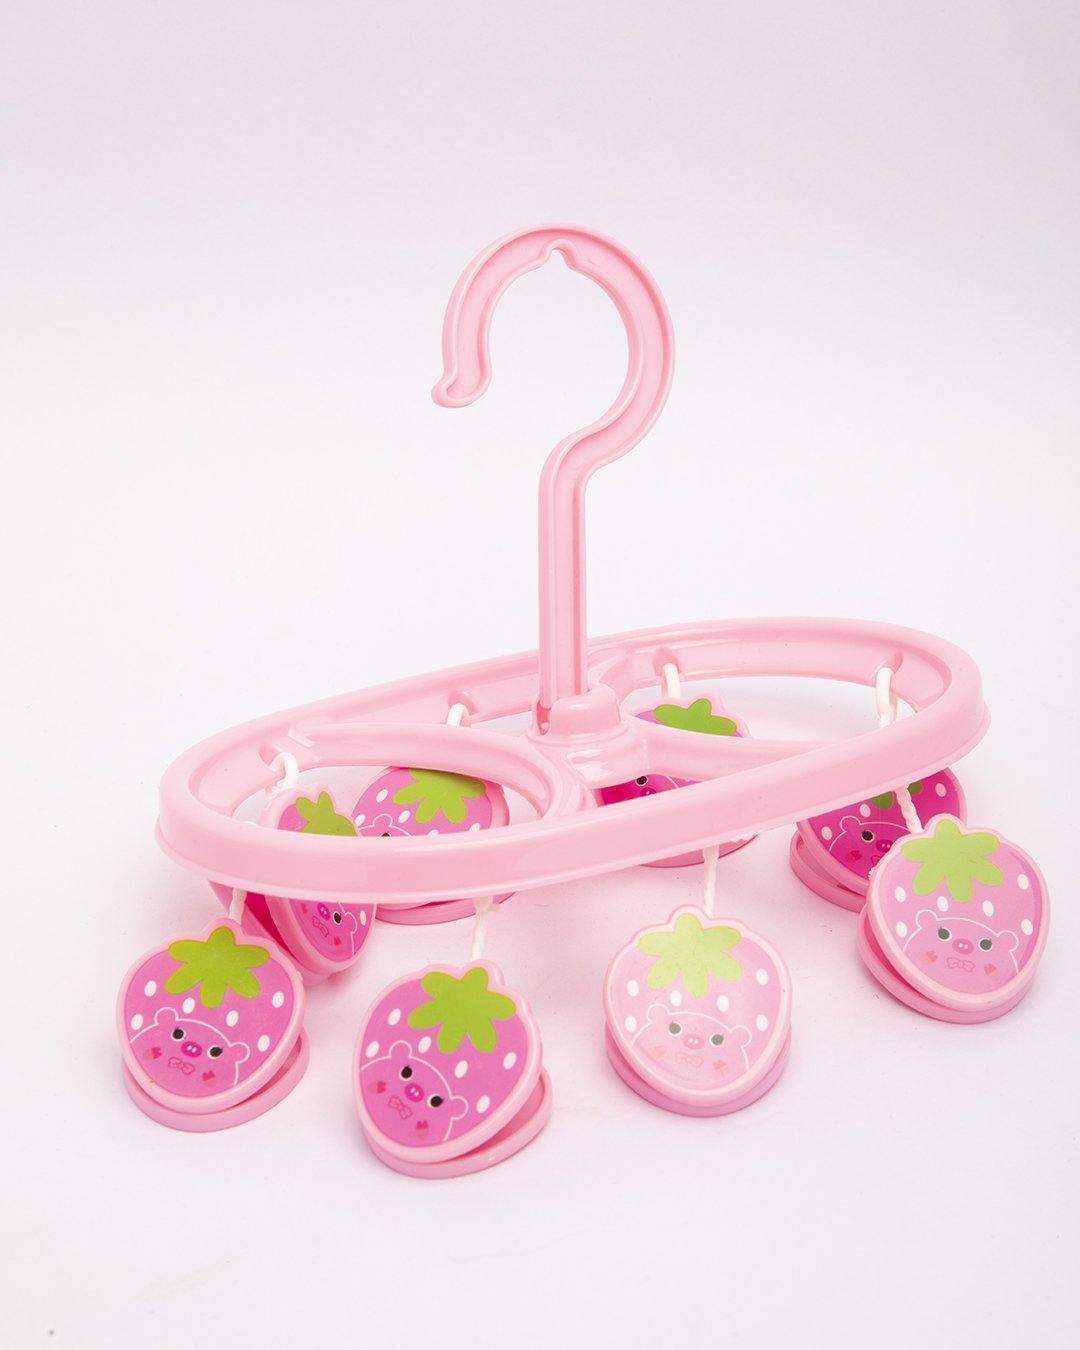 Clothes Hanger with 8 Pegs, Cloth Pegs, Pink, Plastic - MARKET 99